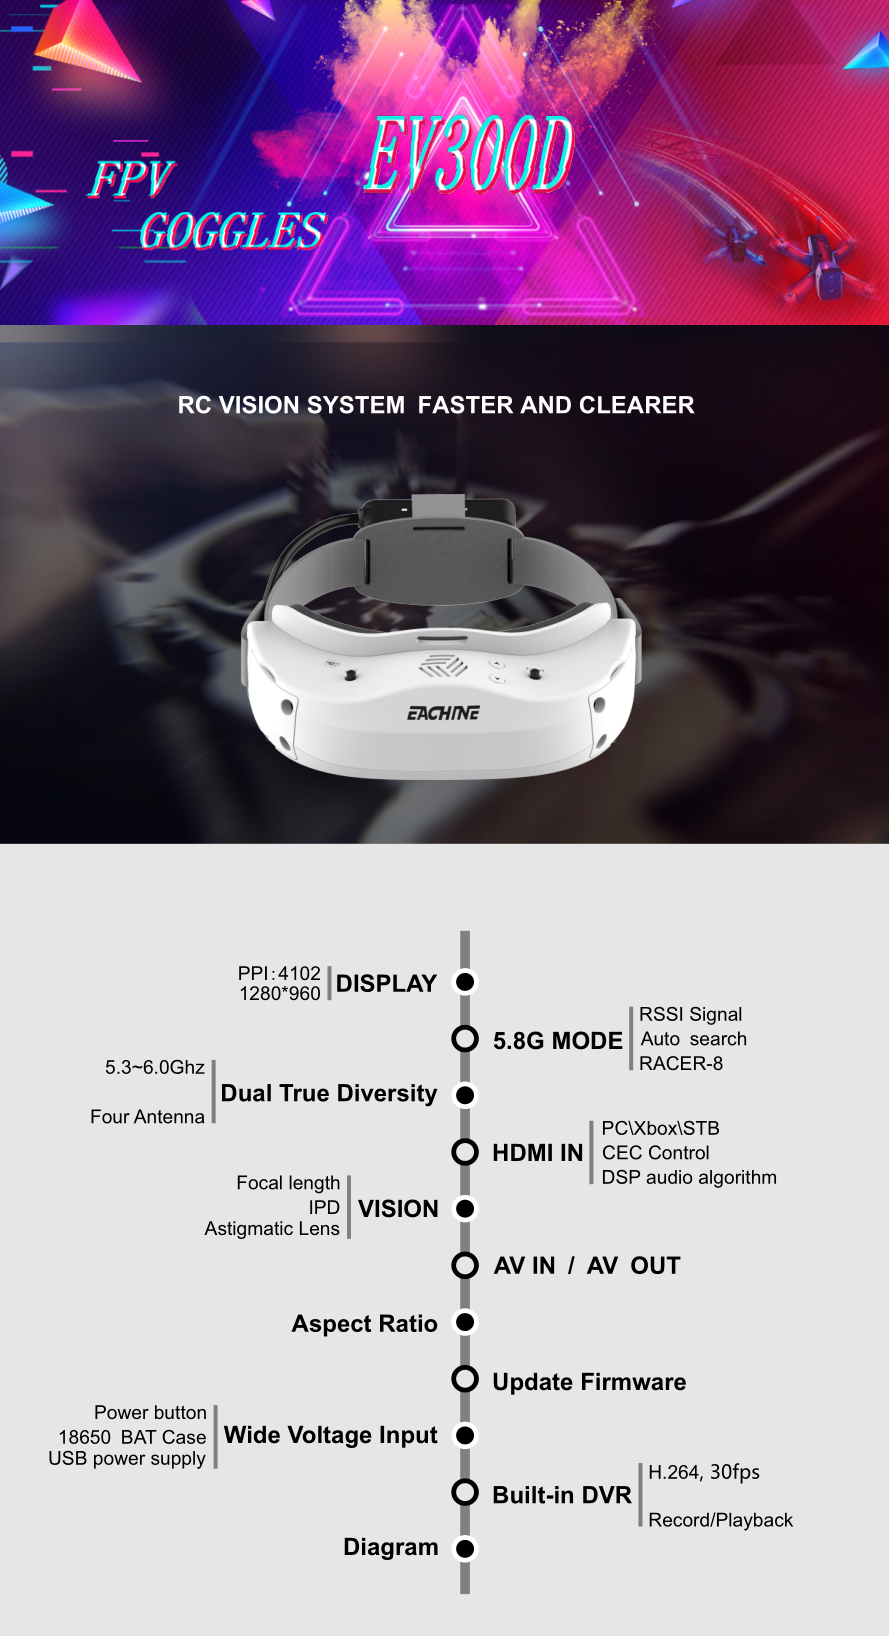 Eachine EV300D 1280*960 5.8G 72CH Dual True Diversity HDMI FPV Goggles Built-in DVR Focal Length Adjustable With Chargeable Battery Case